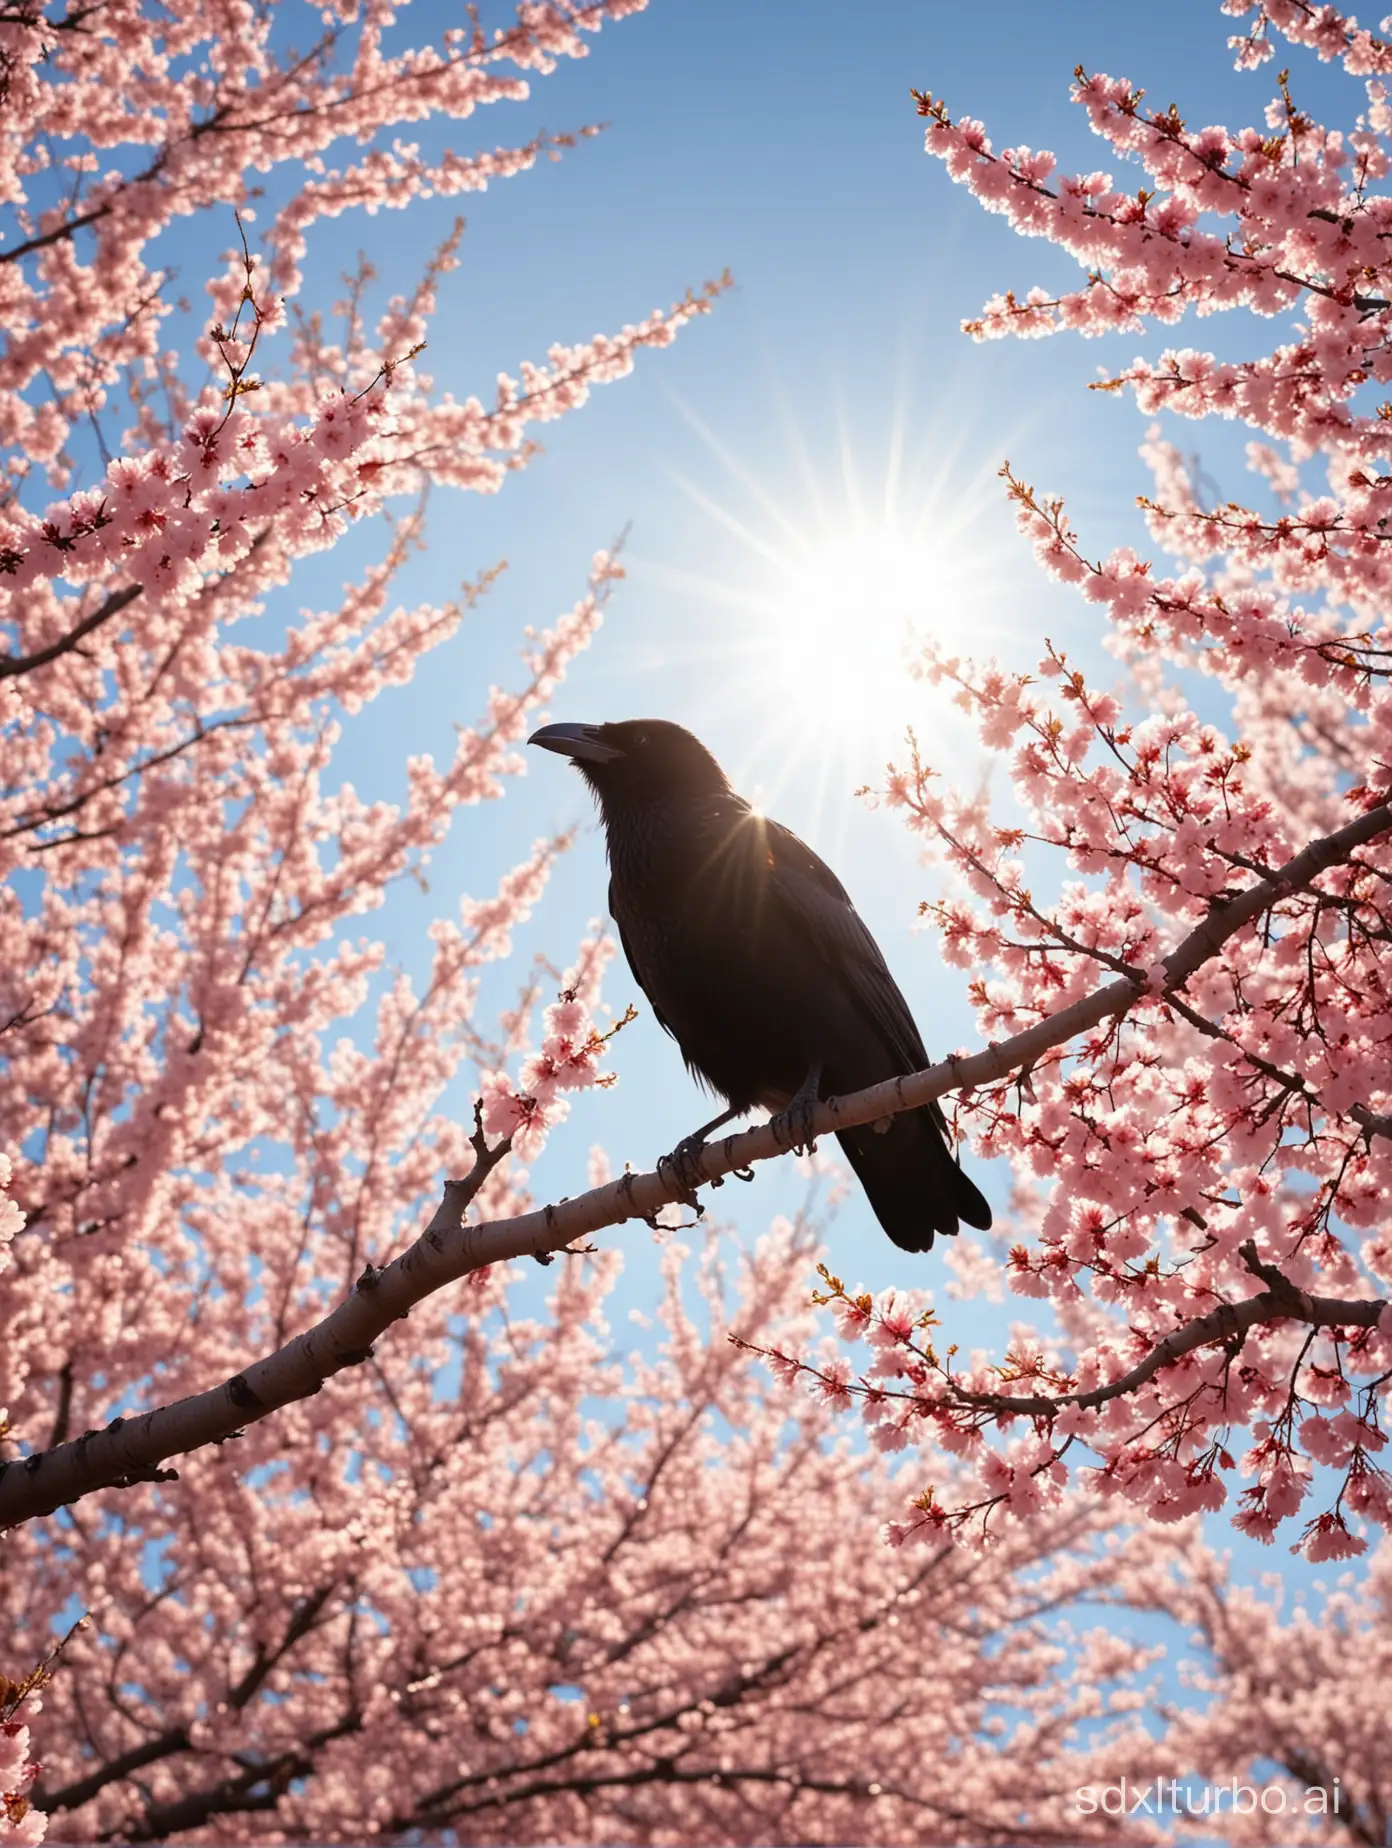 Crow on a cherry blossom tree branch, lens flare, high definition photography